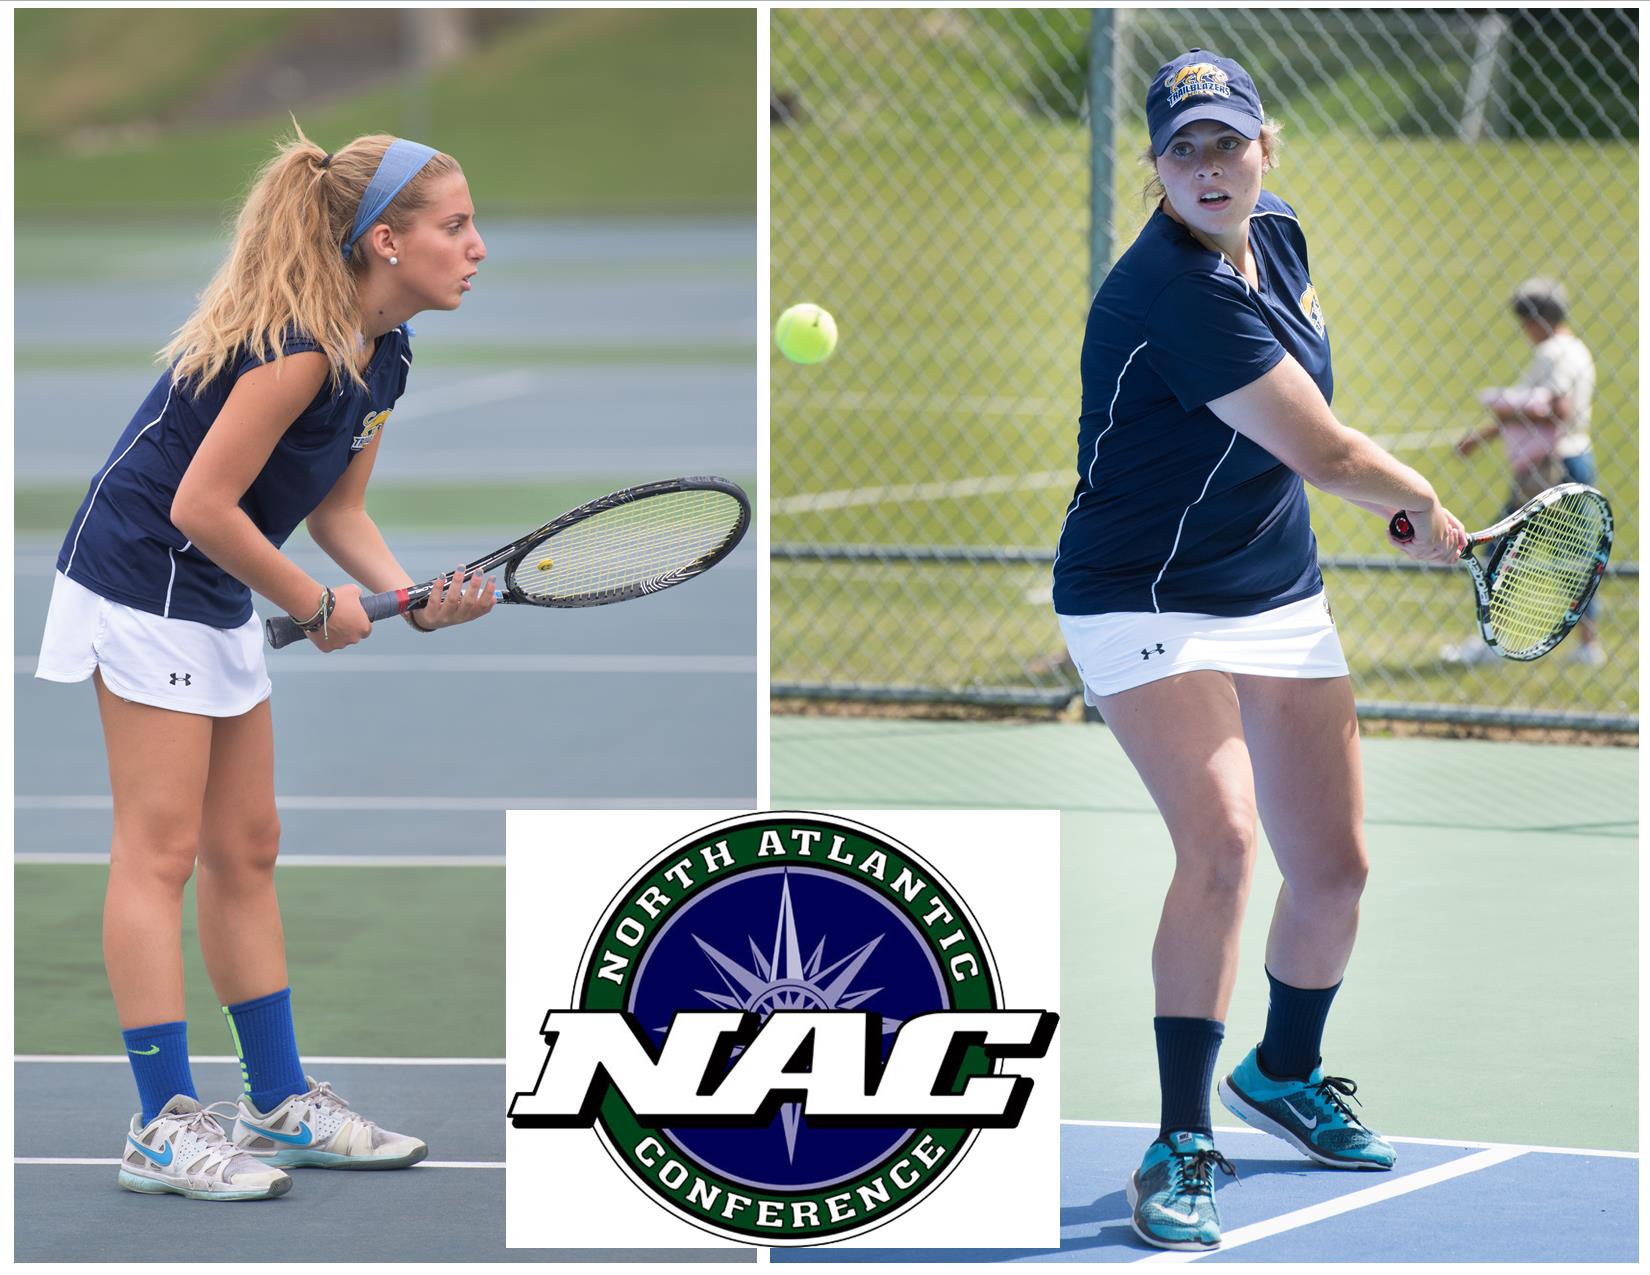 Sfakianaki, Deaso earn first team all NEAC East Division honors in doubles